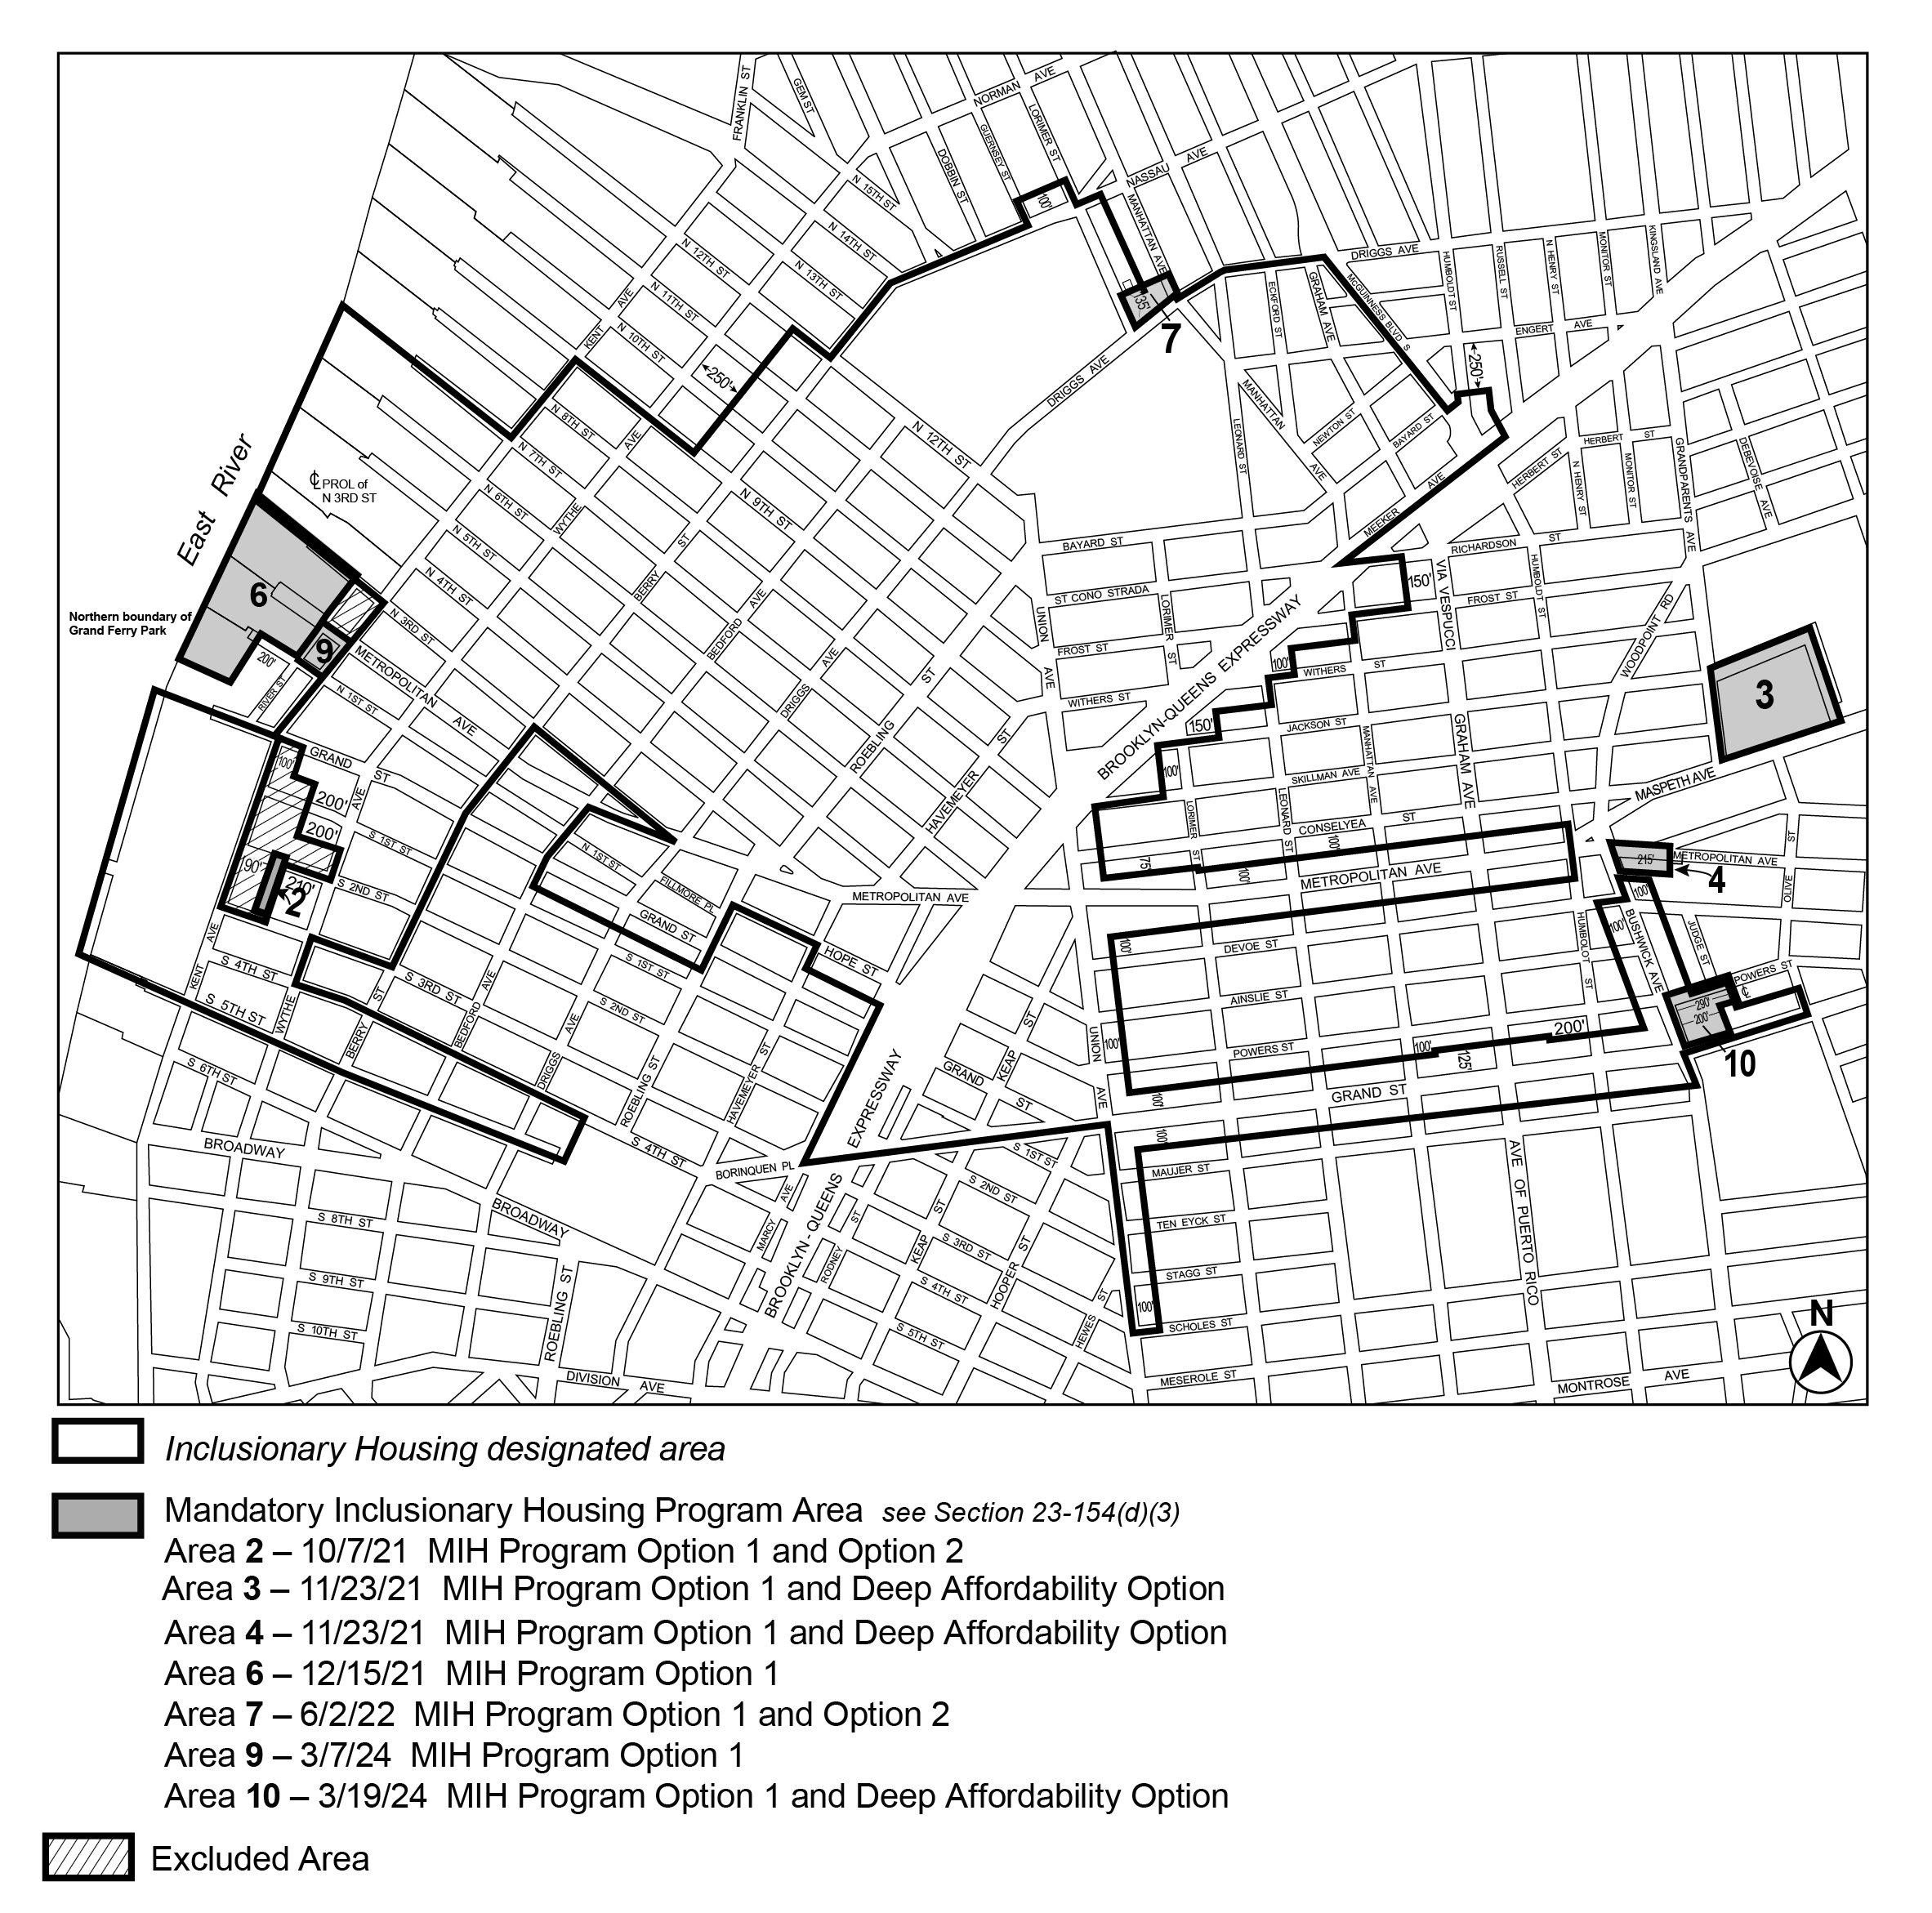 APPENDIX F, BK CD 1, Map 2, MIH area 10 (Option 1 and Deep Affordability Option) per Brownsville Arts Center and Apartments (N 240031 ZRK), adopted 19th March, 2024